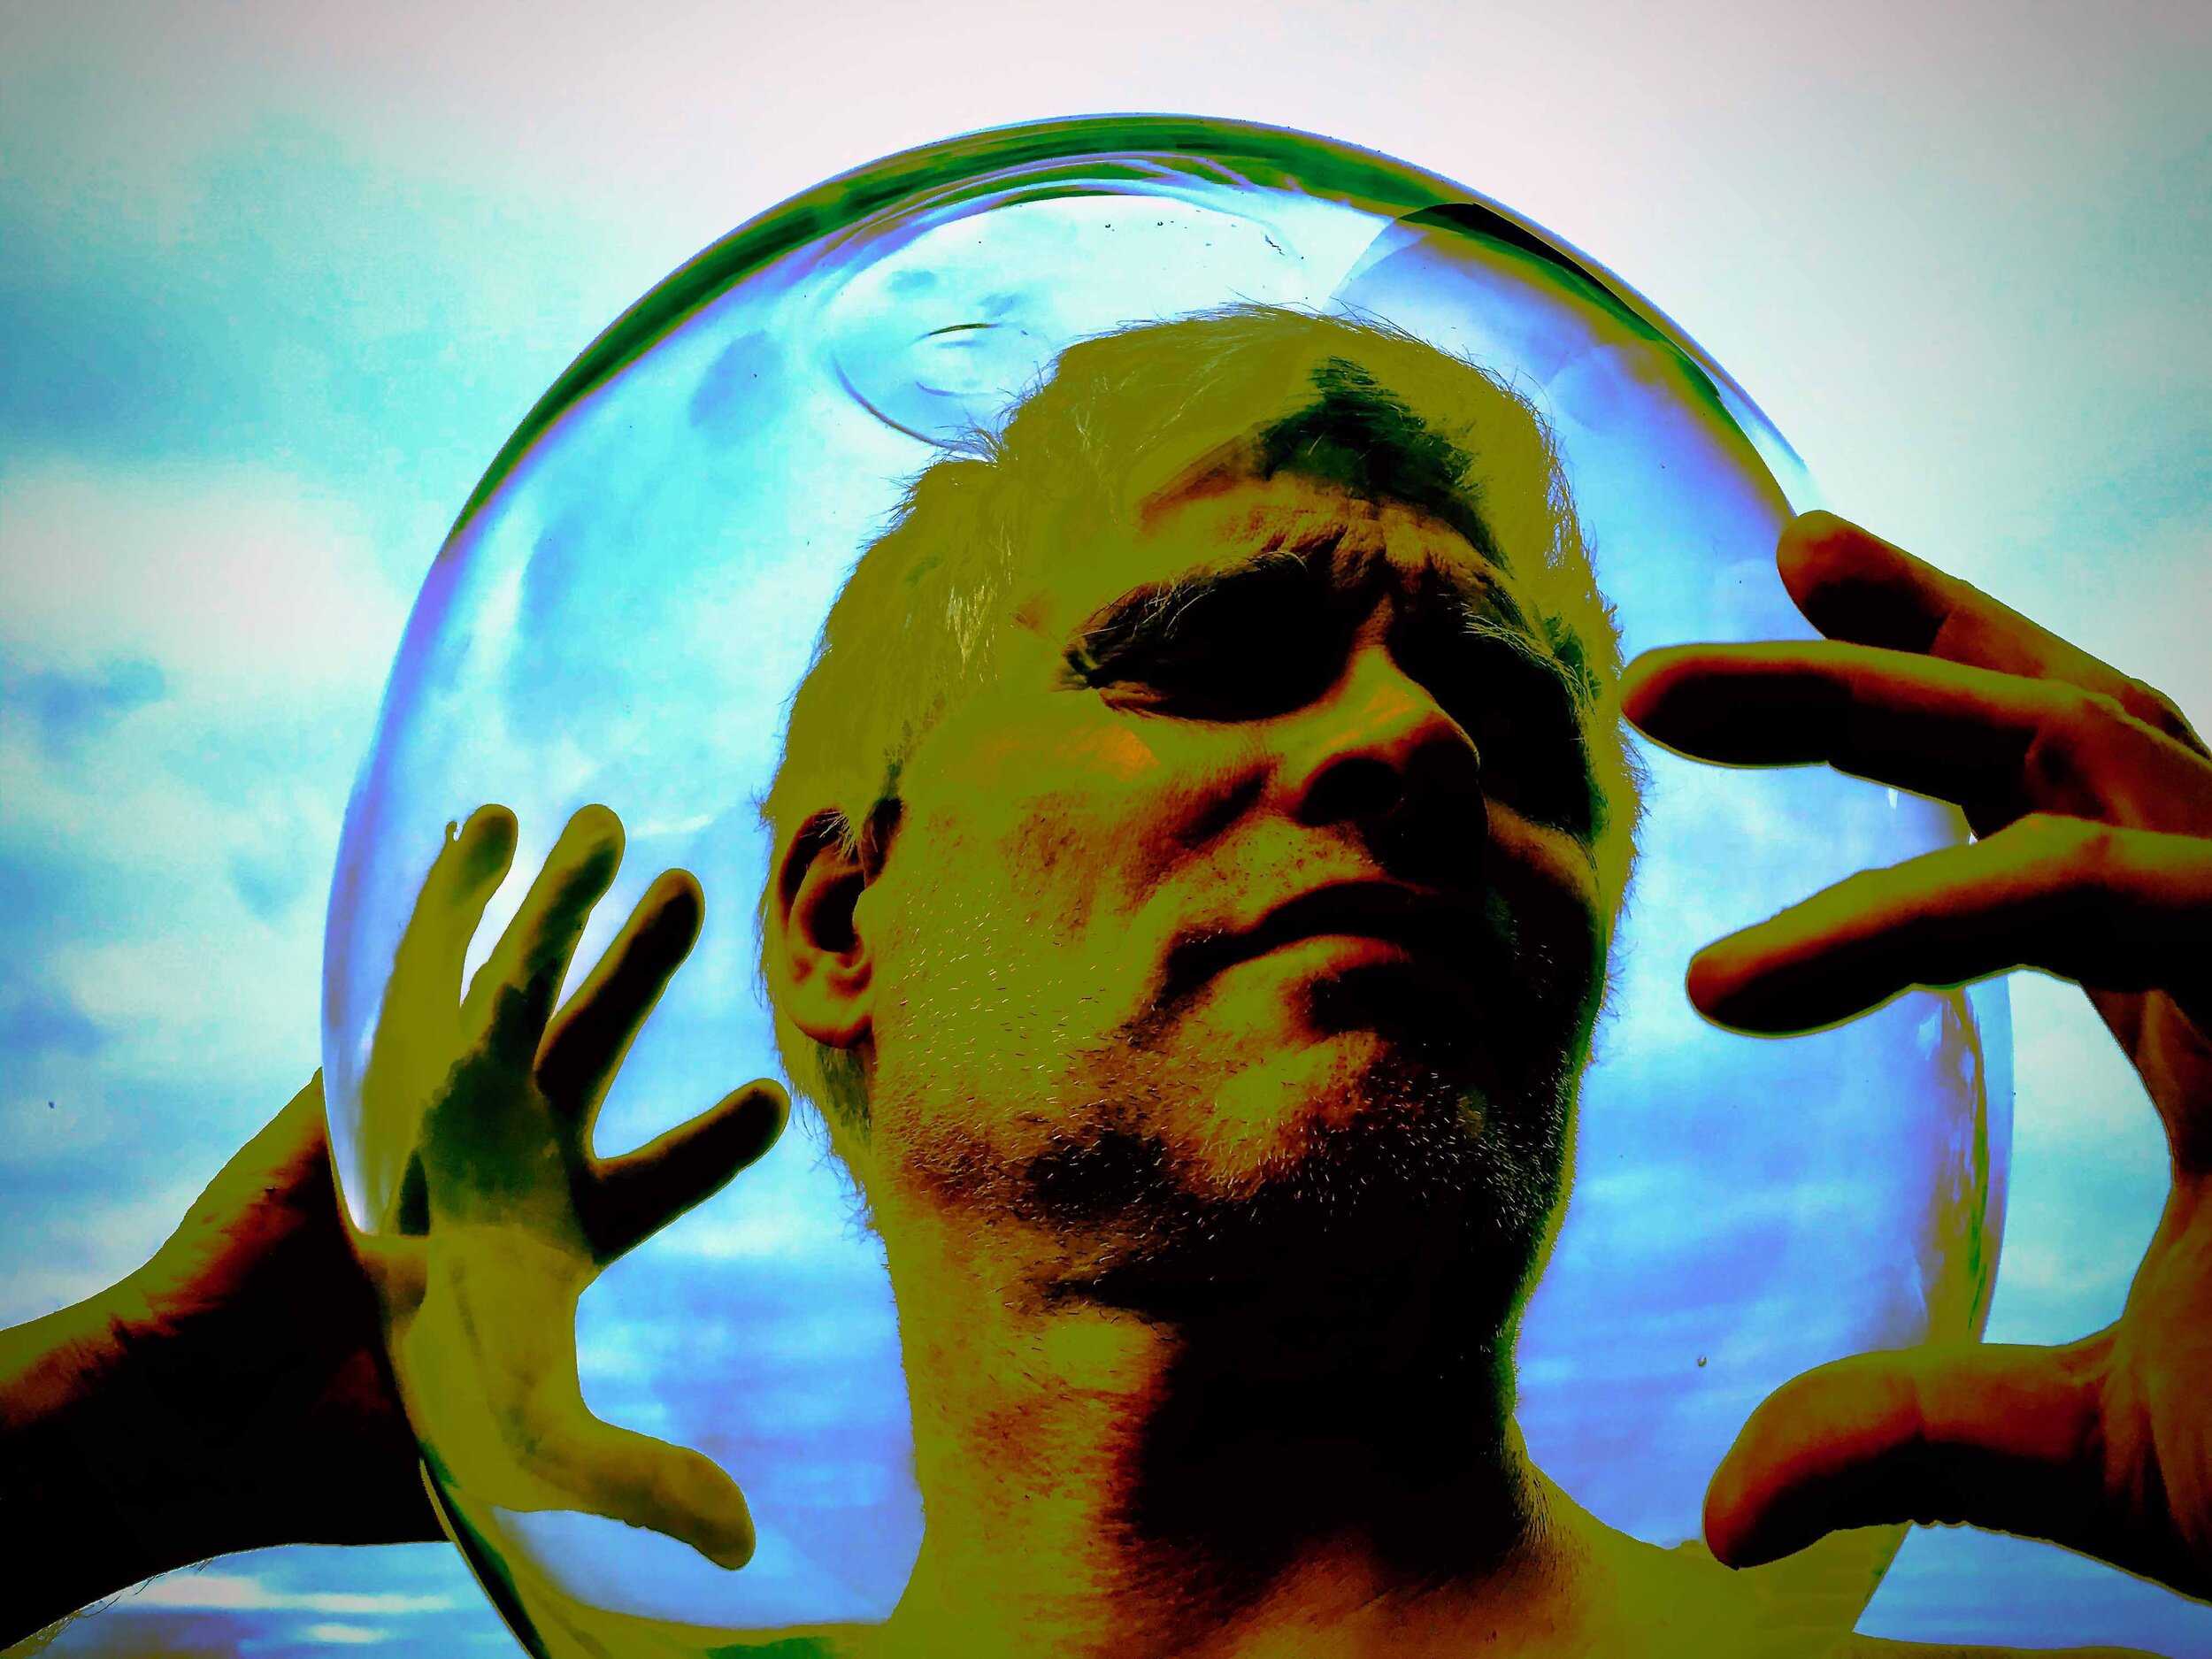 this breath – safety bubble